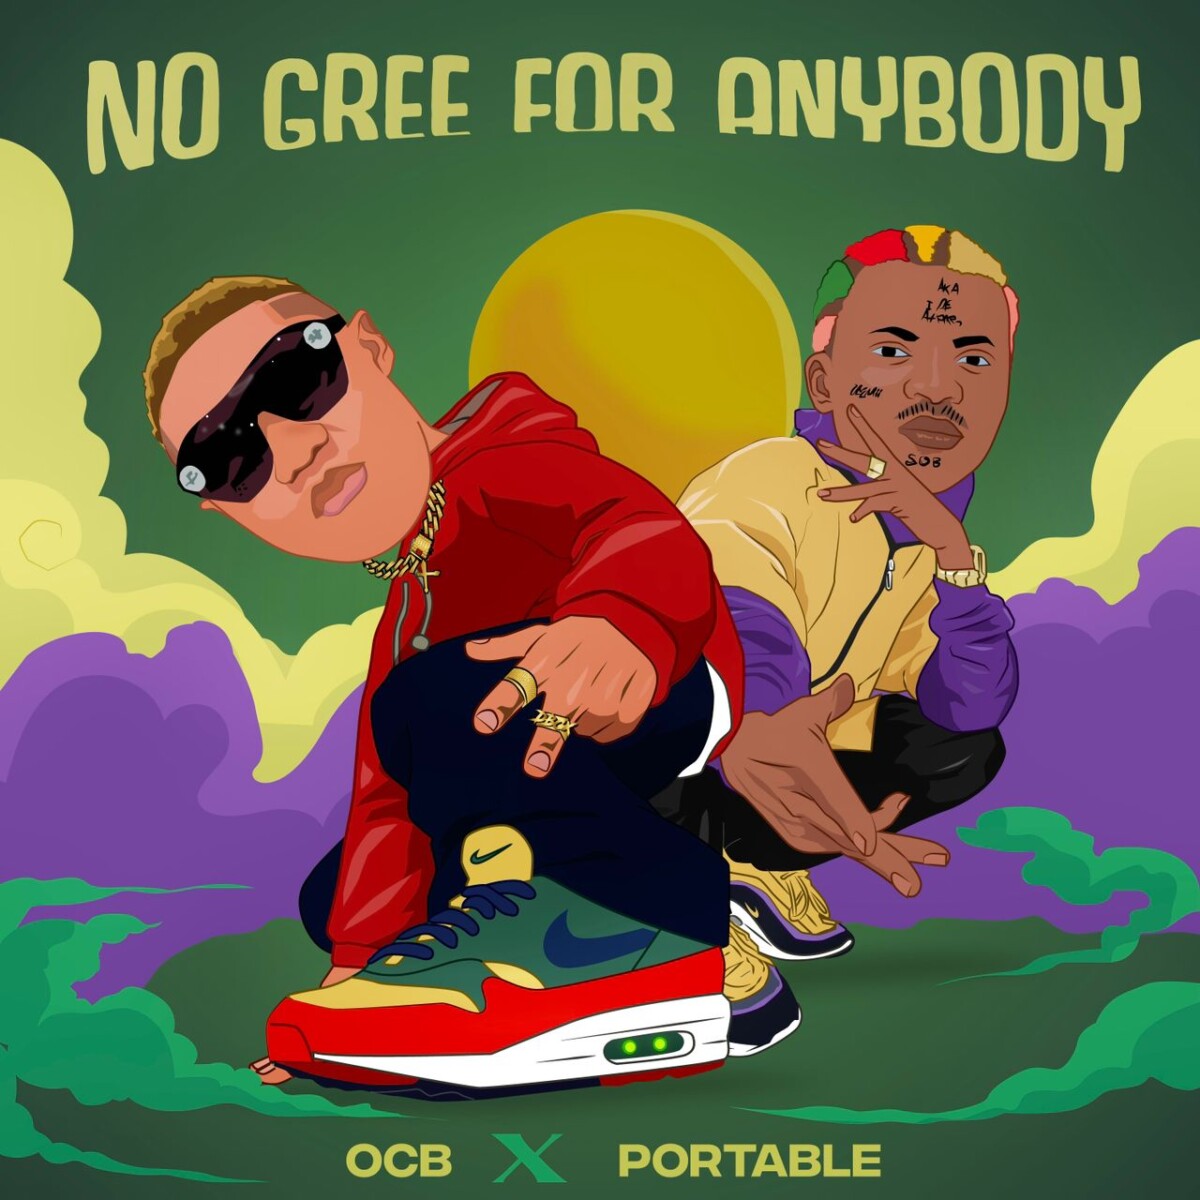 No gree for anybody by OCB ft. Portable